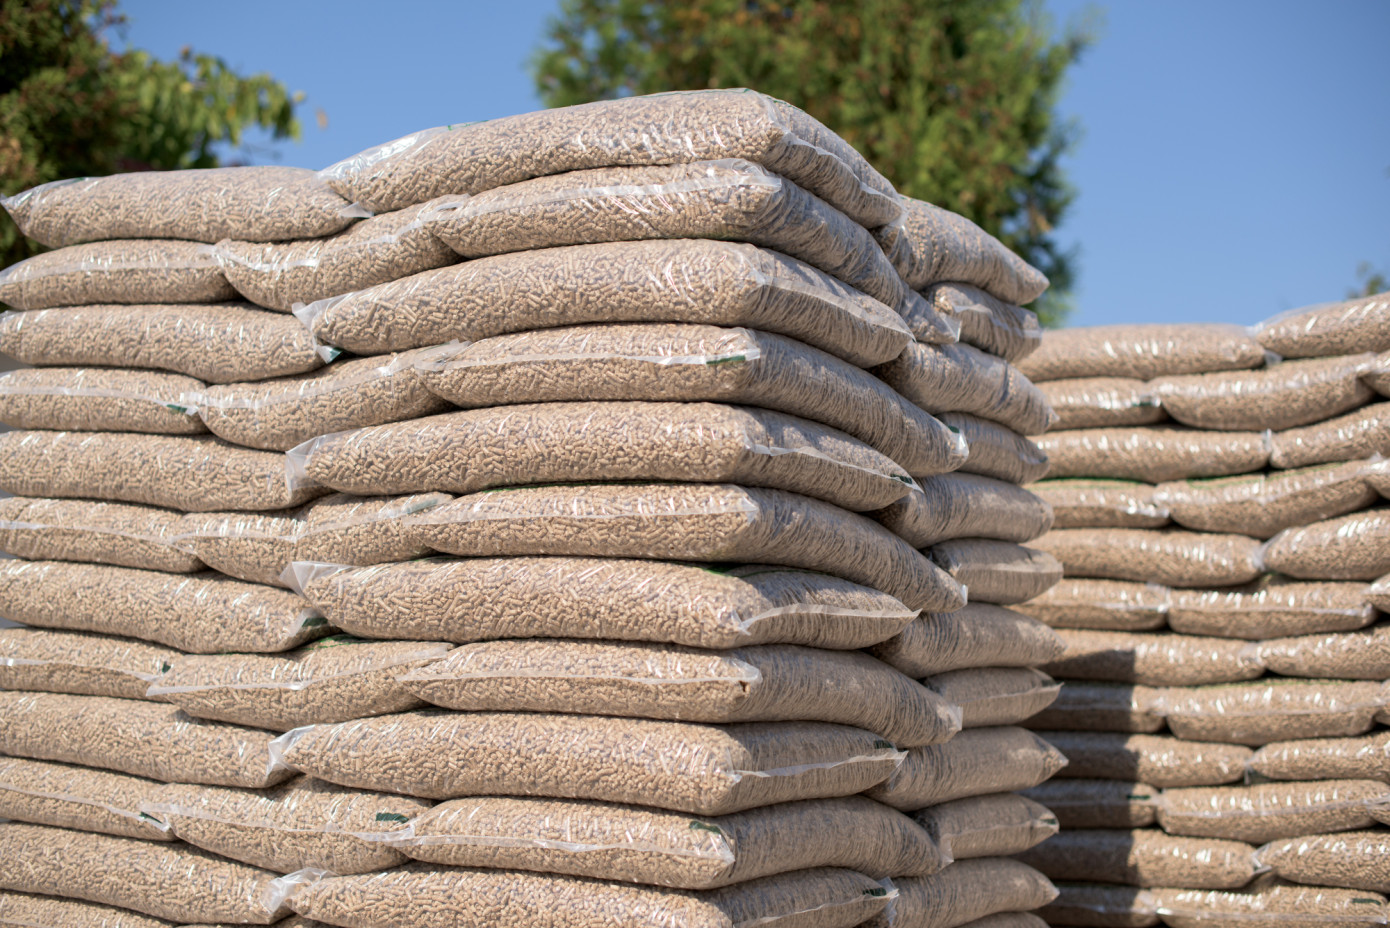 Wood pellet imports to Japan continue to grow in February